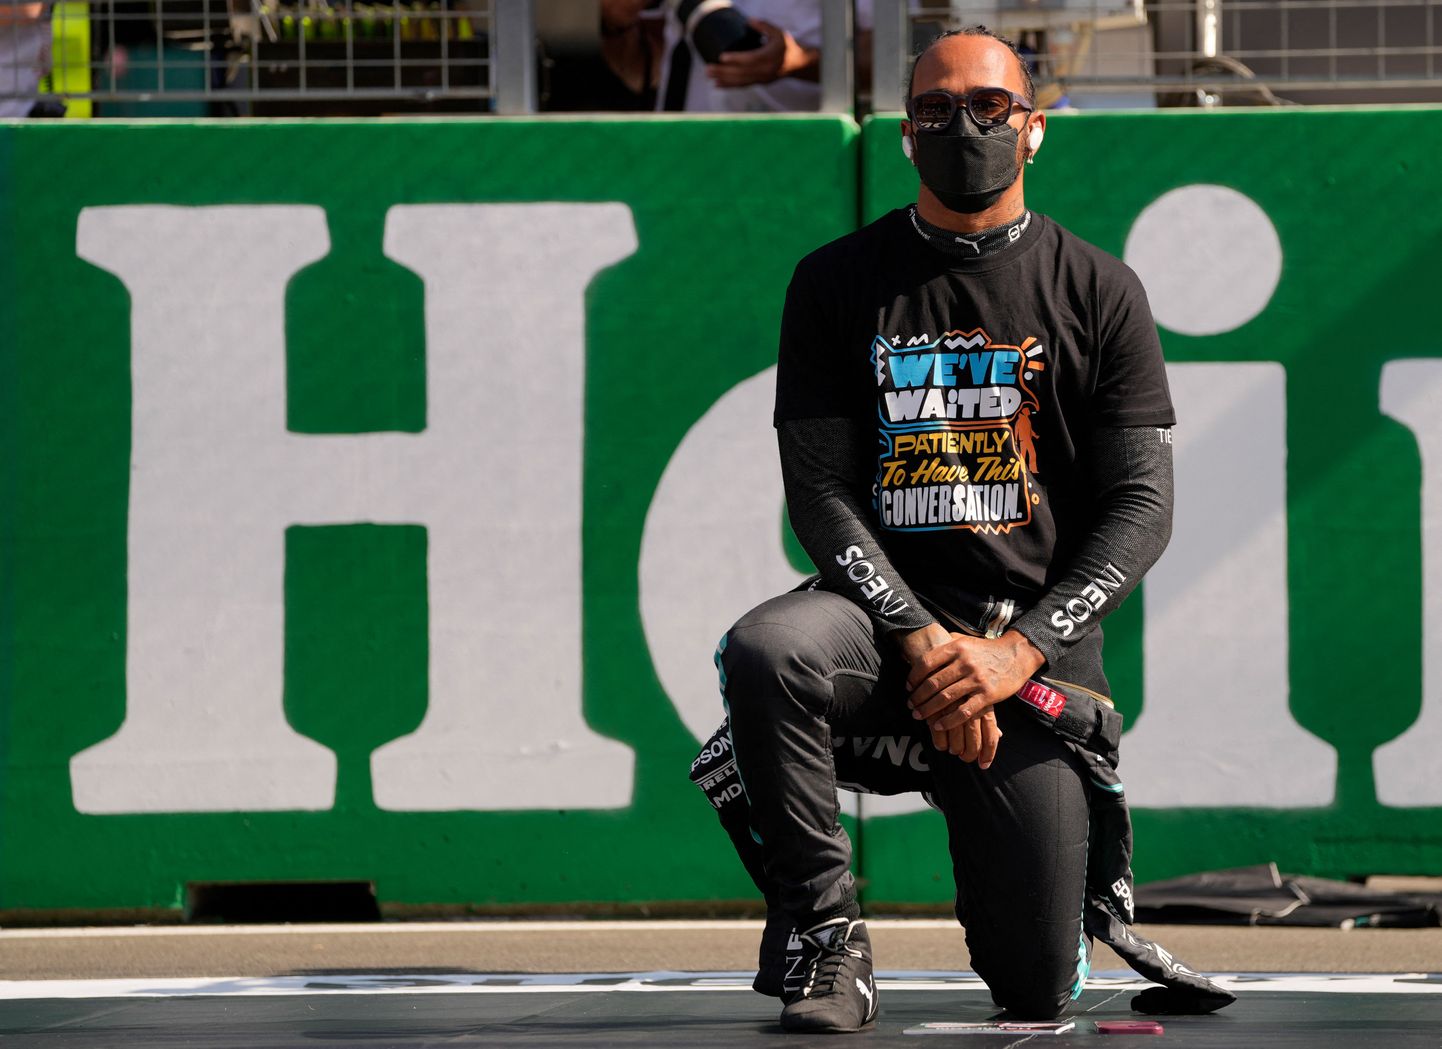 Mercedes' British driver Lewis Hamilton kneels down during F1's 'We Race As One' anti-racism campaign on the grid of the Zandvoort circuit before the start of the Netherlands' Formula One Grand Prix in Zandvoort on September 5, 2021. (Photo by Francisco Seco / POOL / AFP)